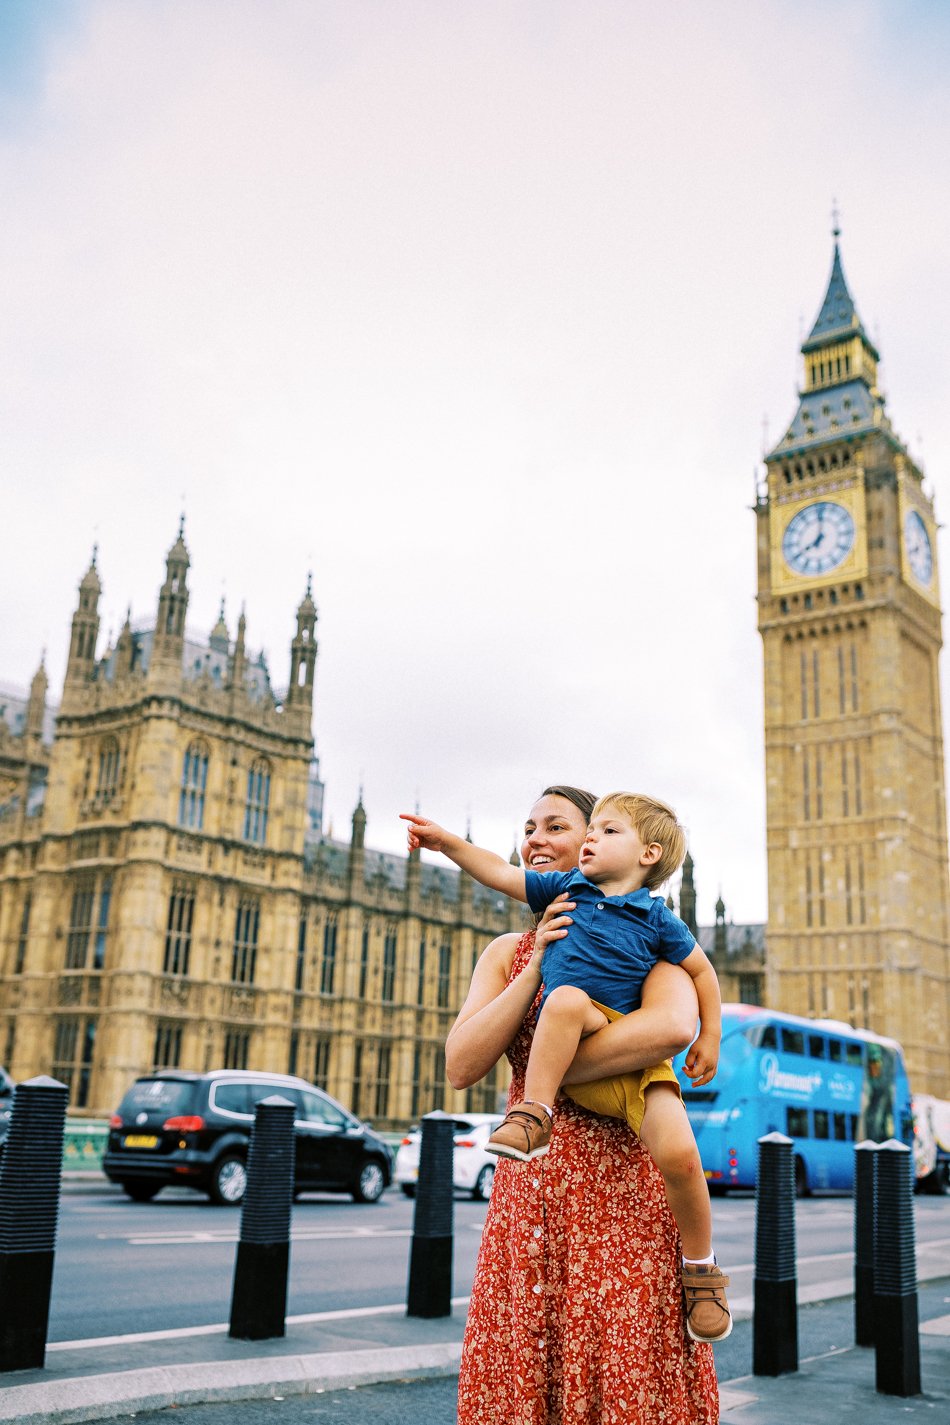 London Vacation Photography - Tell the story of your London adventures